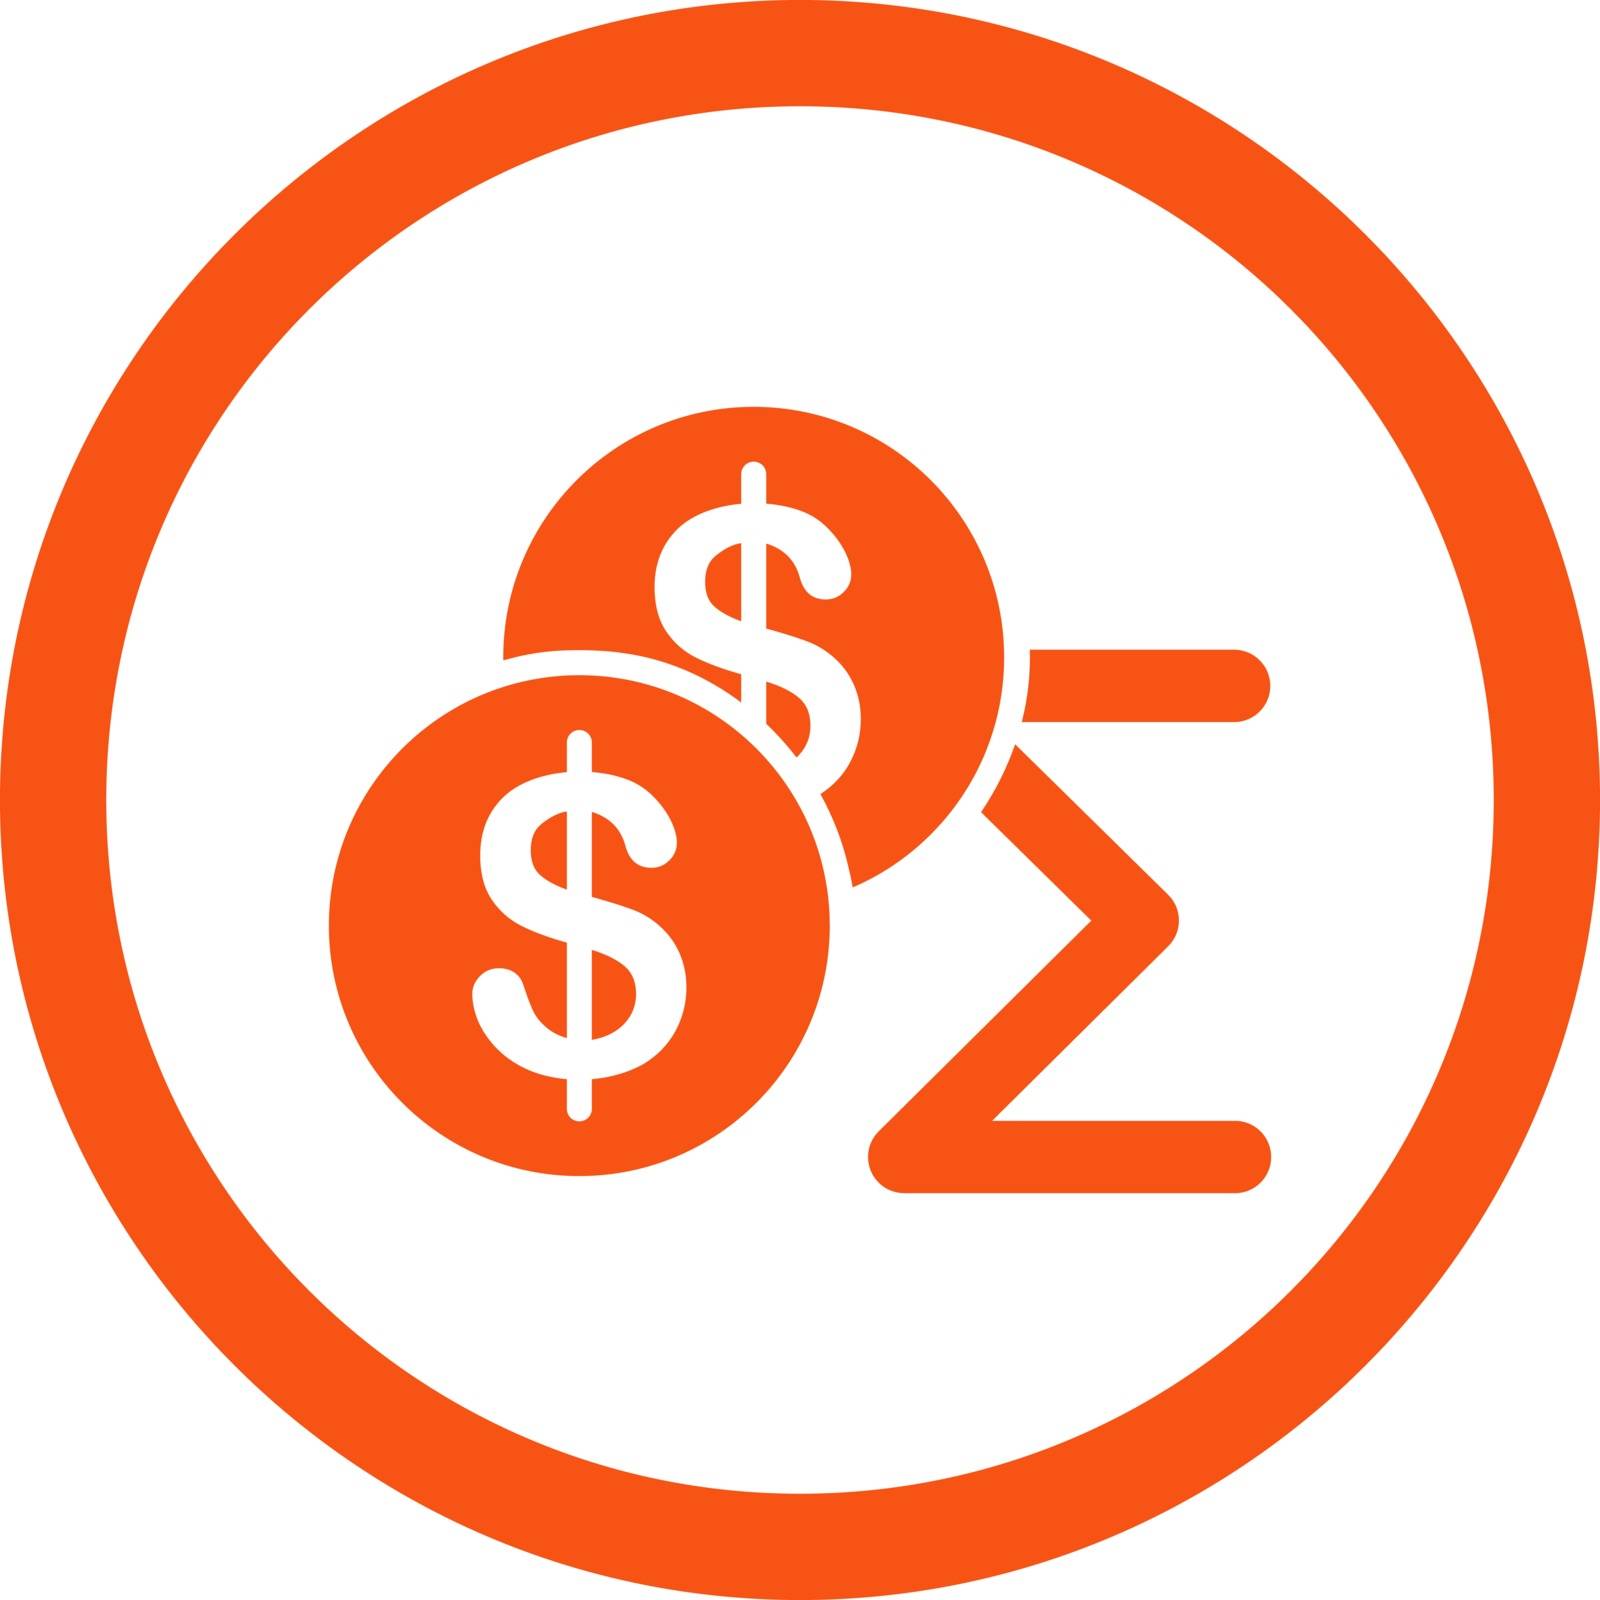 Summary vector icon. This flat rounded symbol uses orange color and isolated on a white background.